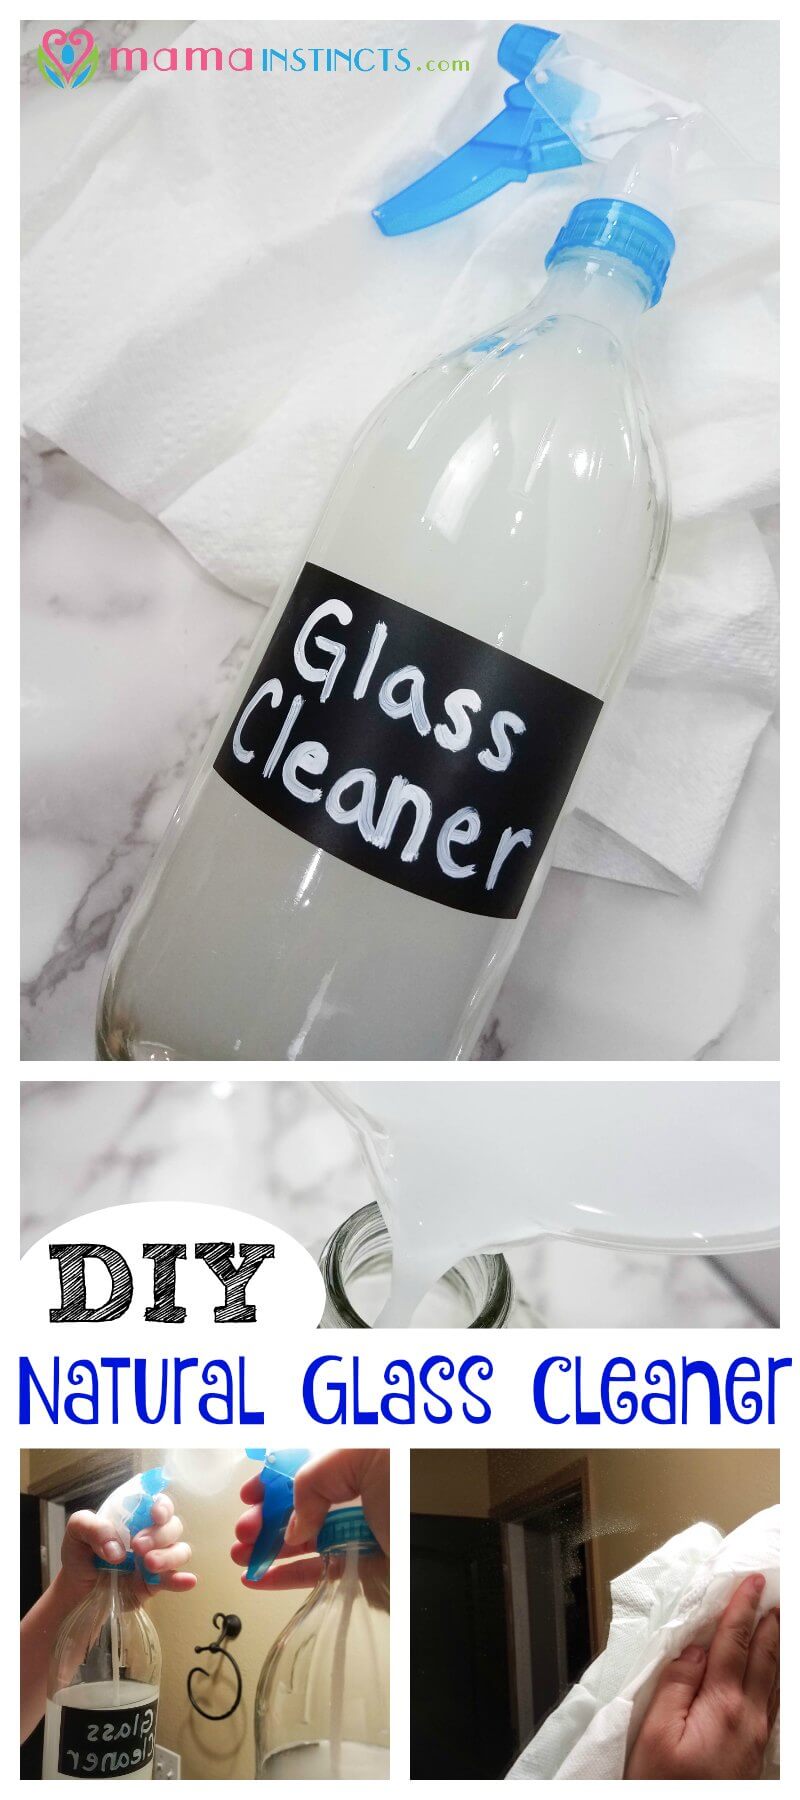 Want an effective window, glass and mirror cleaner that is made with natural ingredients, safe and non-toxic? Then you have to try this easy DIY recipe.